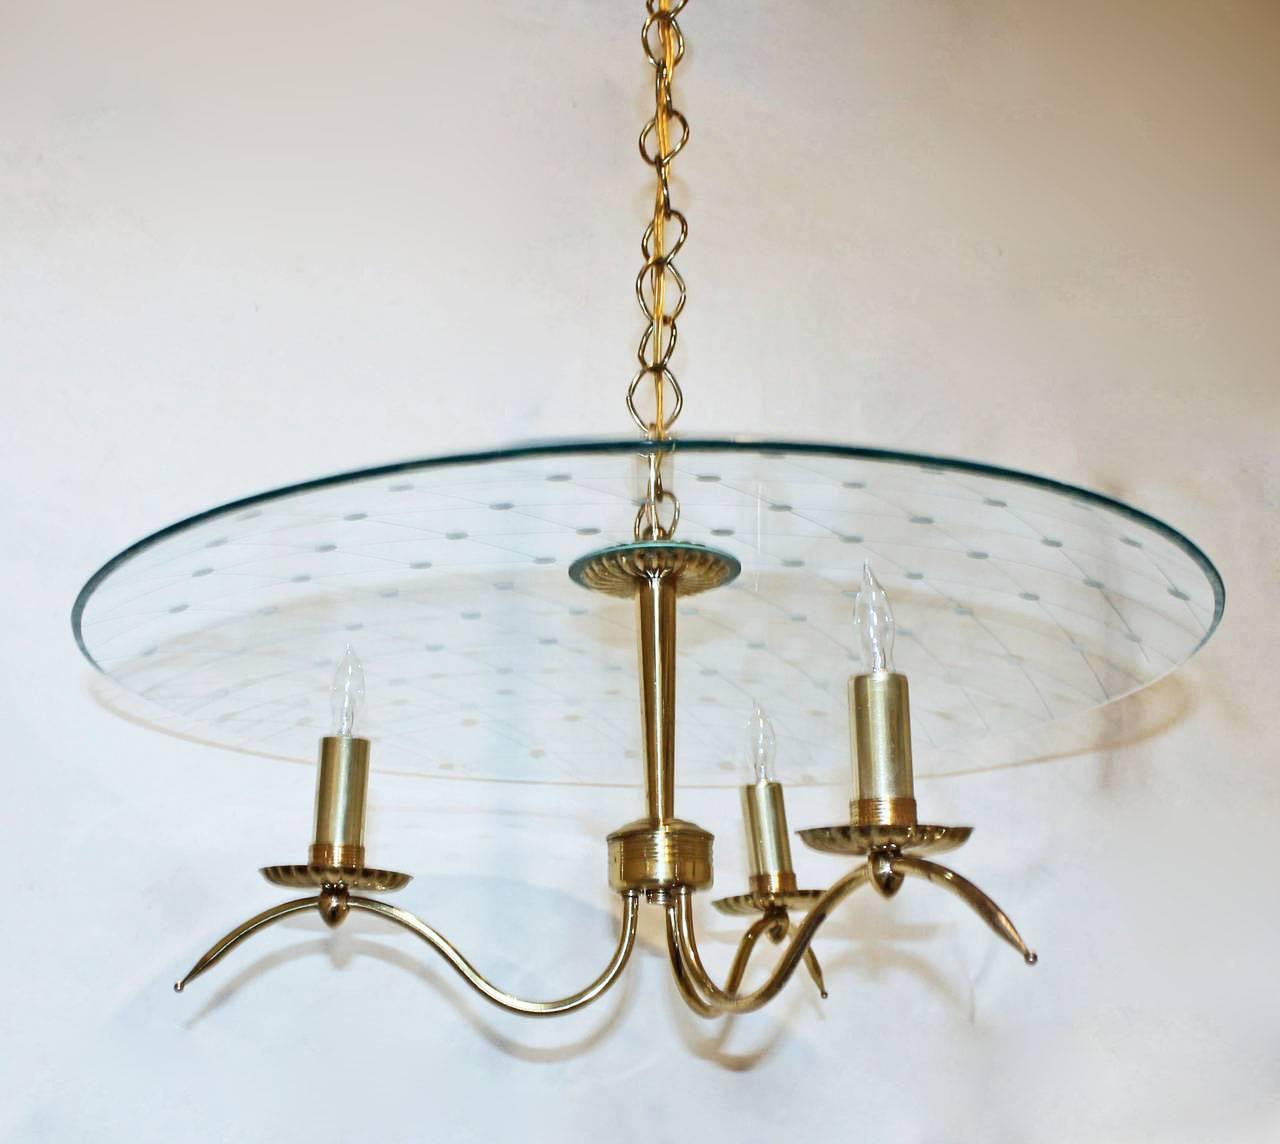 Mid-20th Century Exquisite Italian Fontana Arte Style Brass Etched Glass Chandelier For Sale